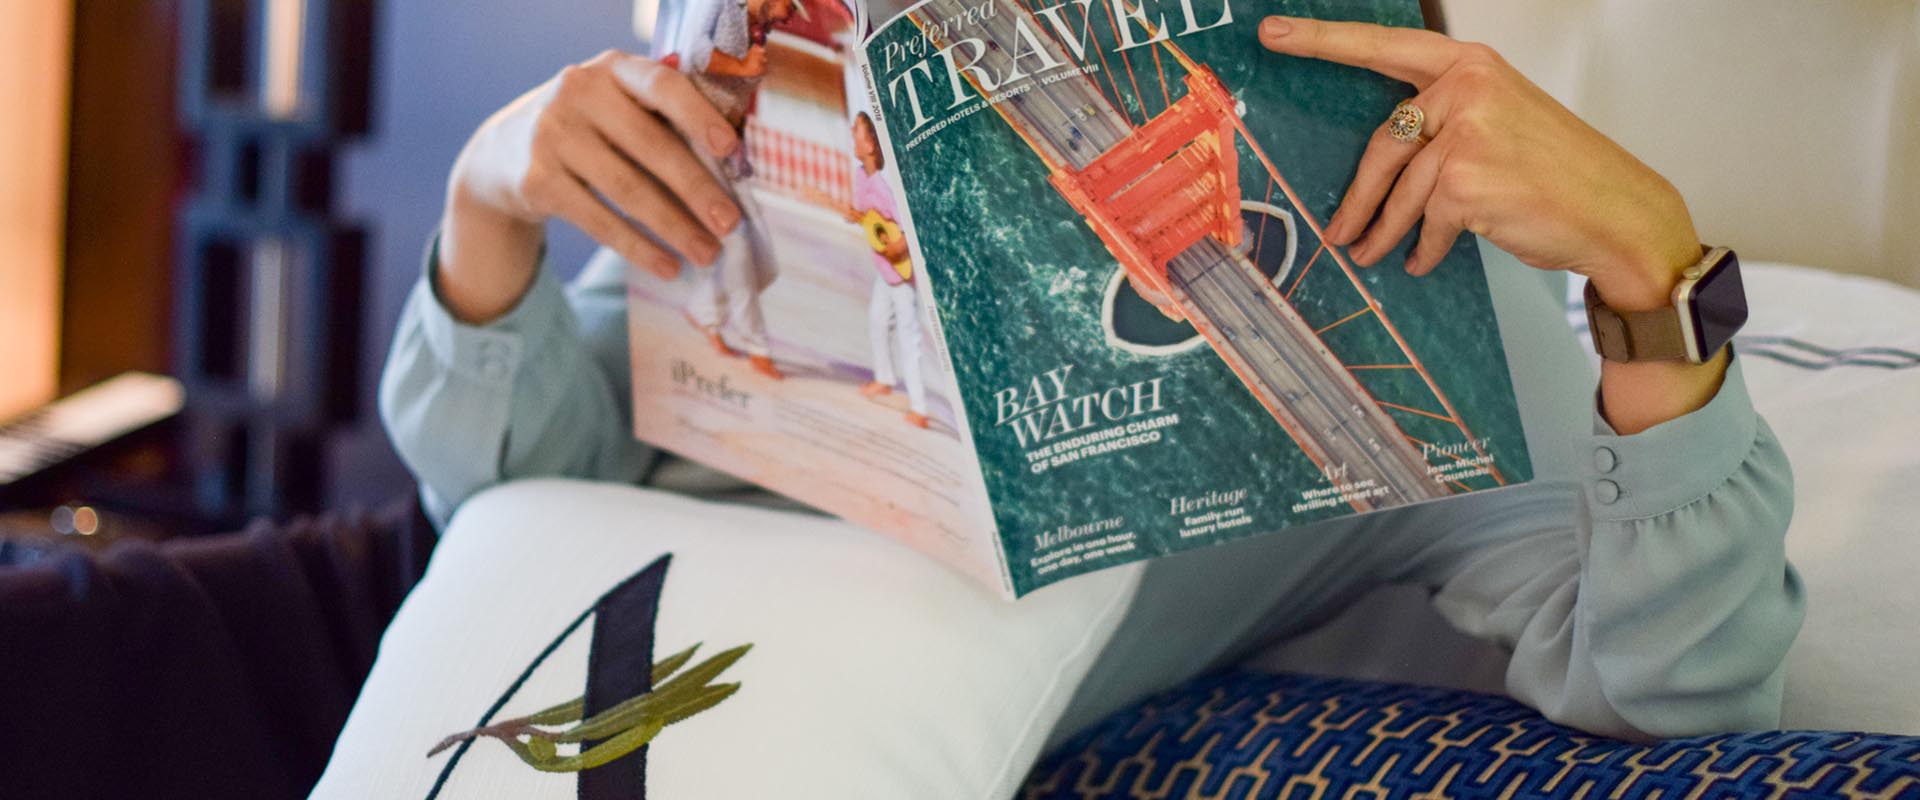 Hotel guest reading a magazine